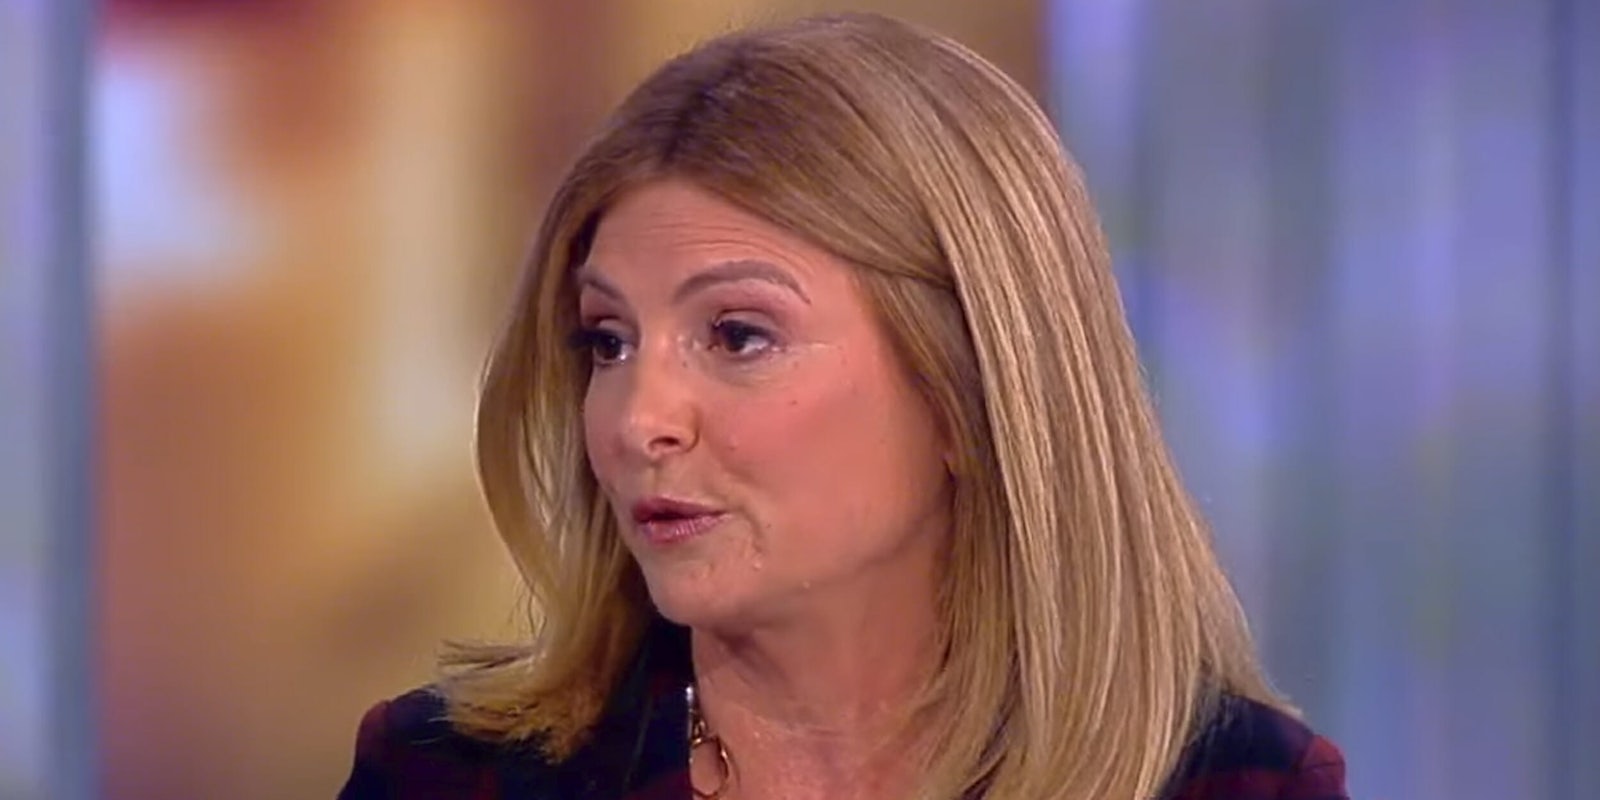 Celebrity lawyer Lisa Bloom reportedly sought to get cash for two of Trump's accusers, according to a new report from the Hill.